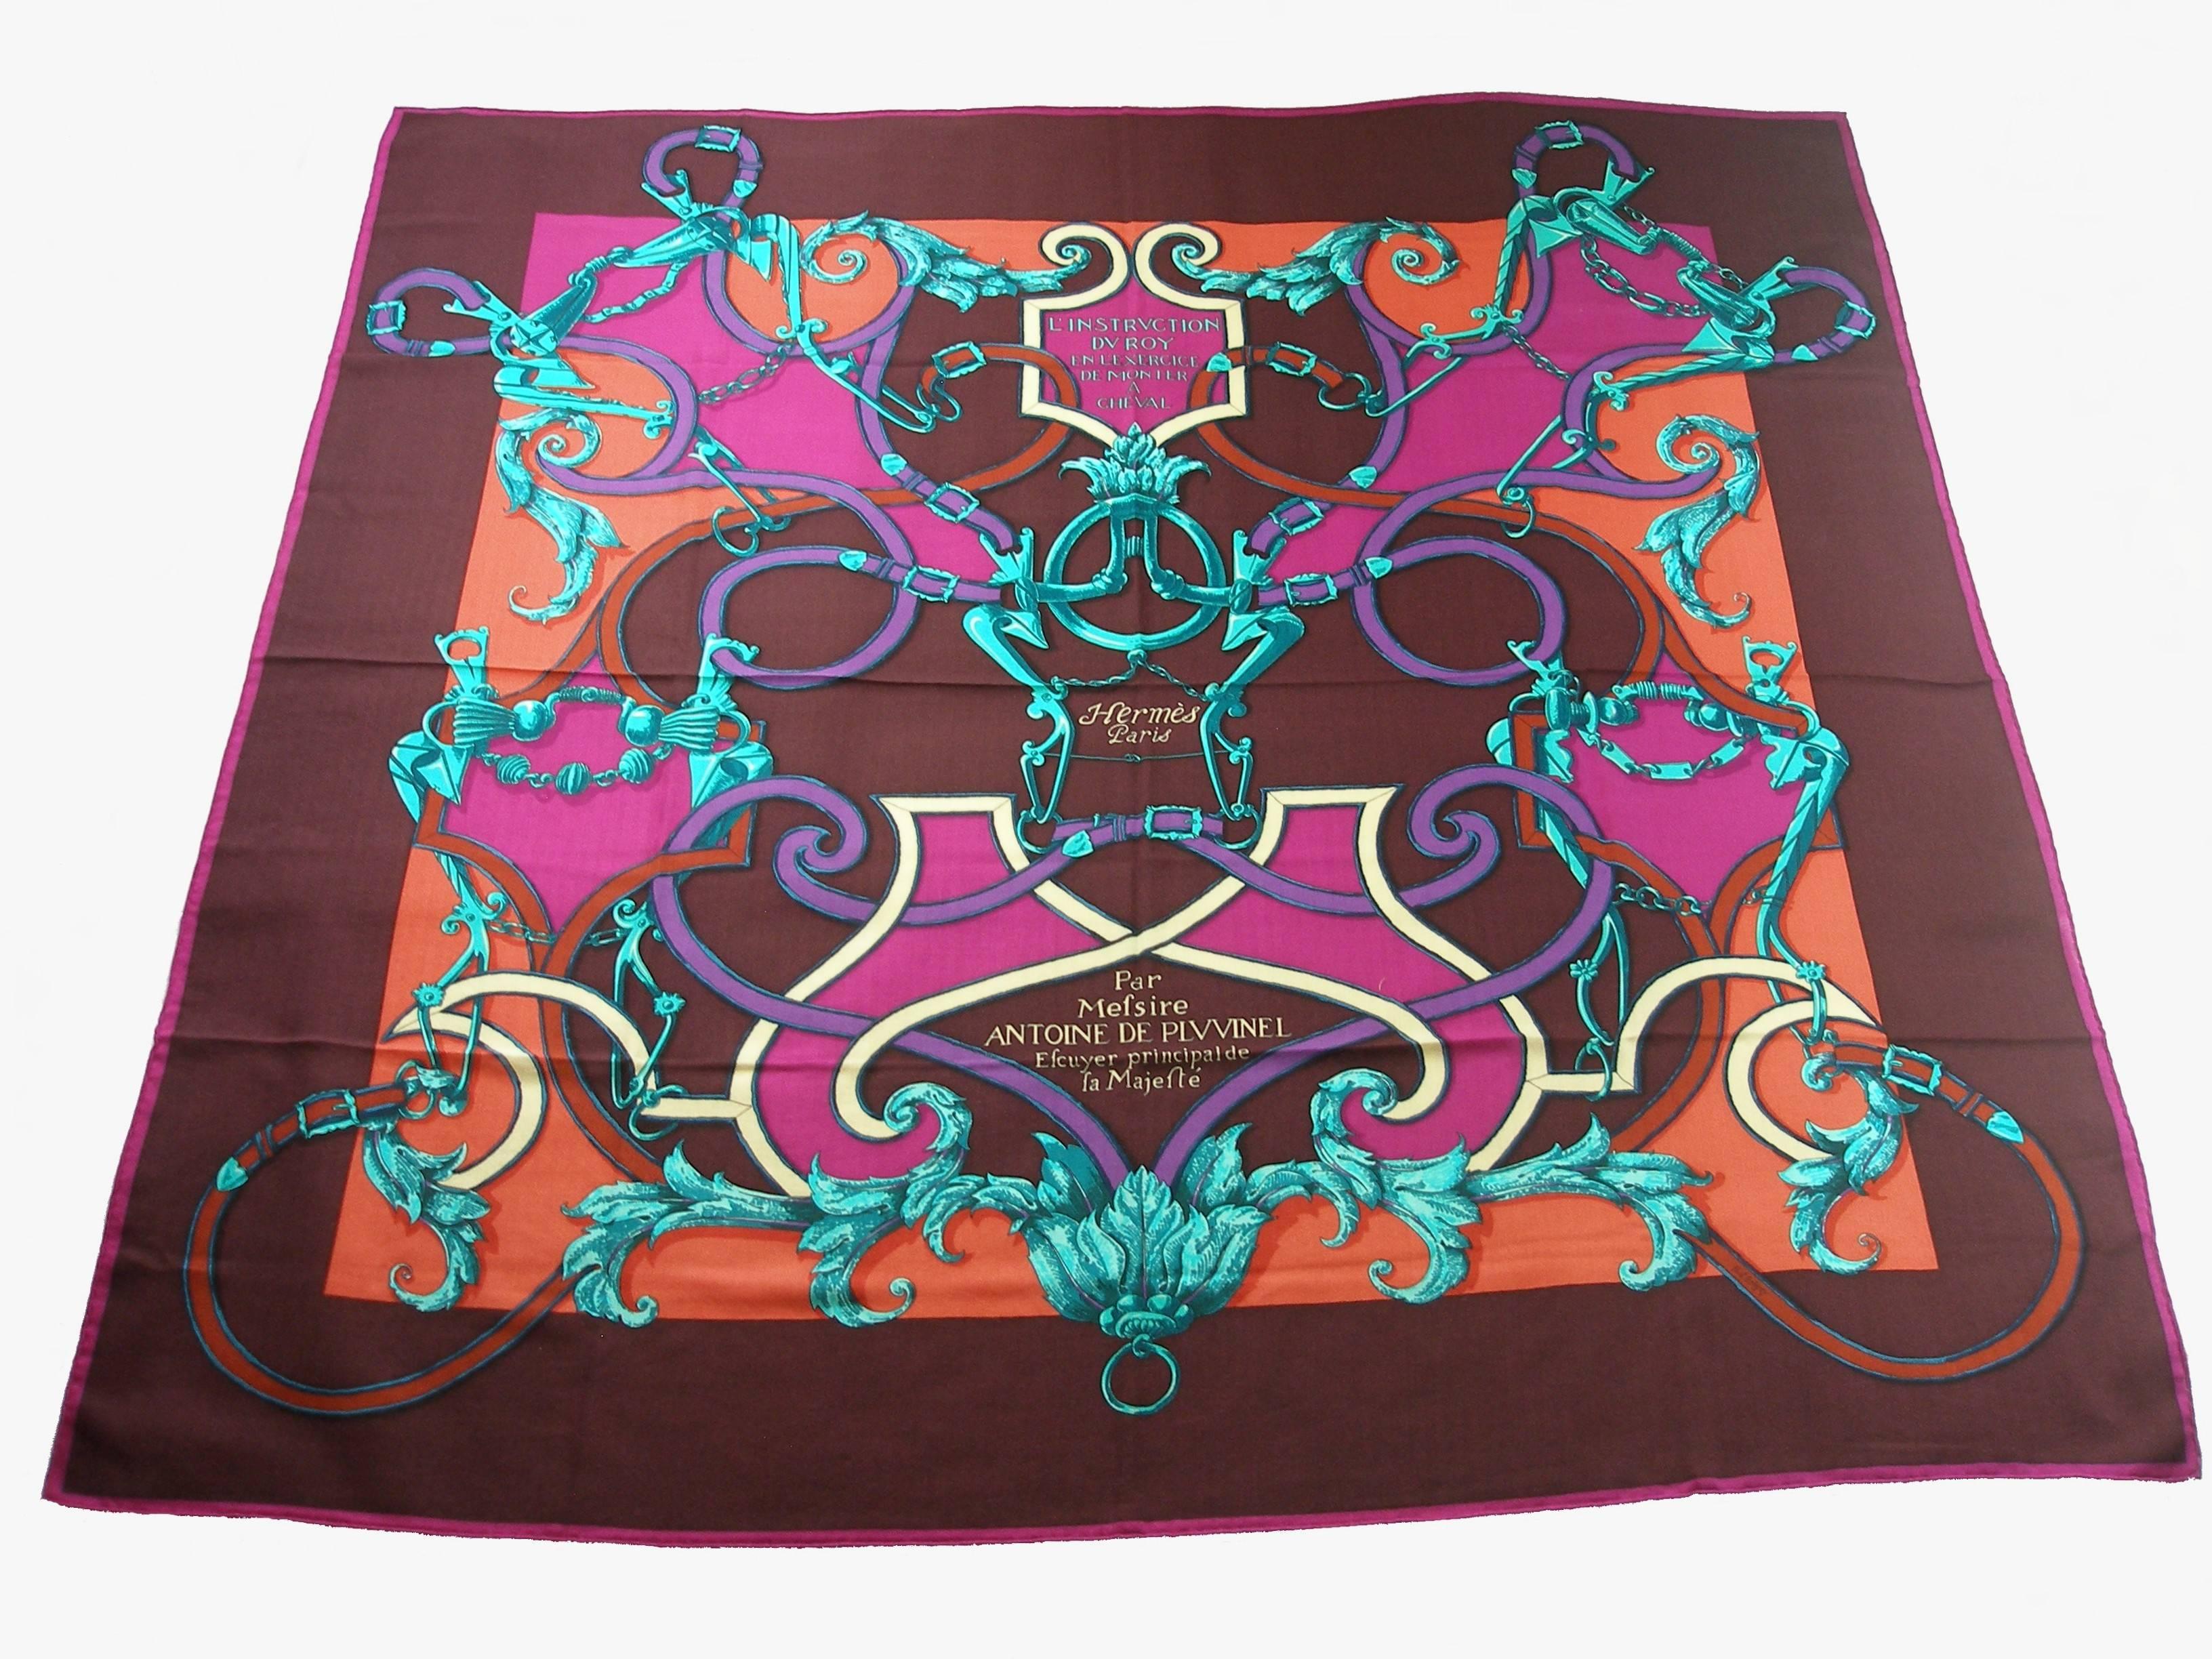 Impossible to find in Hermès shop 
HERMÈS Cashmere Silk L'instruction du Roi 140  
By Henri D'Origny
The exceptional quality and incredible beauty of this Hermes scarf makes it a fabulous fashion accessory.
Color : aubergine - fuschia - orange 
Size